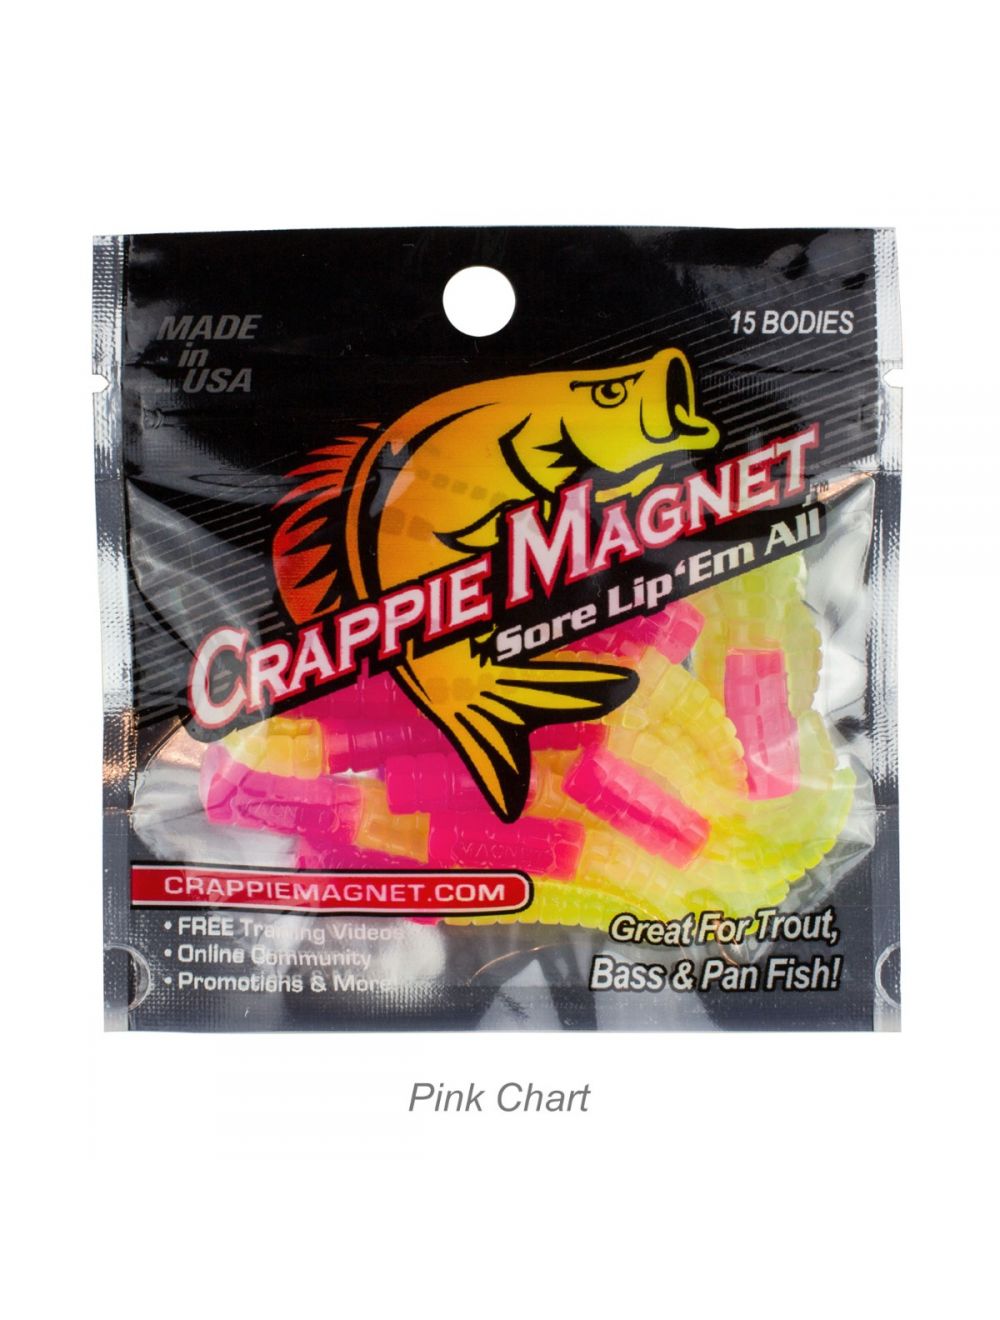 Buy Fishing Crimps 64 Piece Pack online at